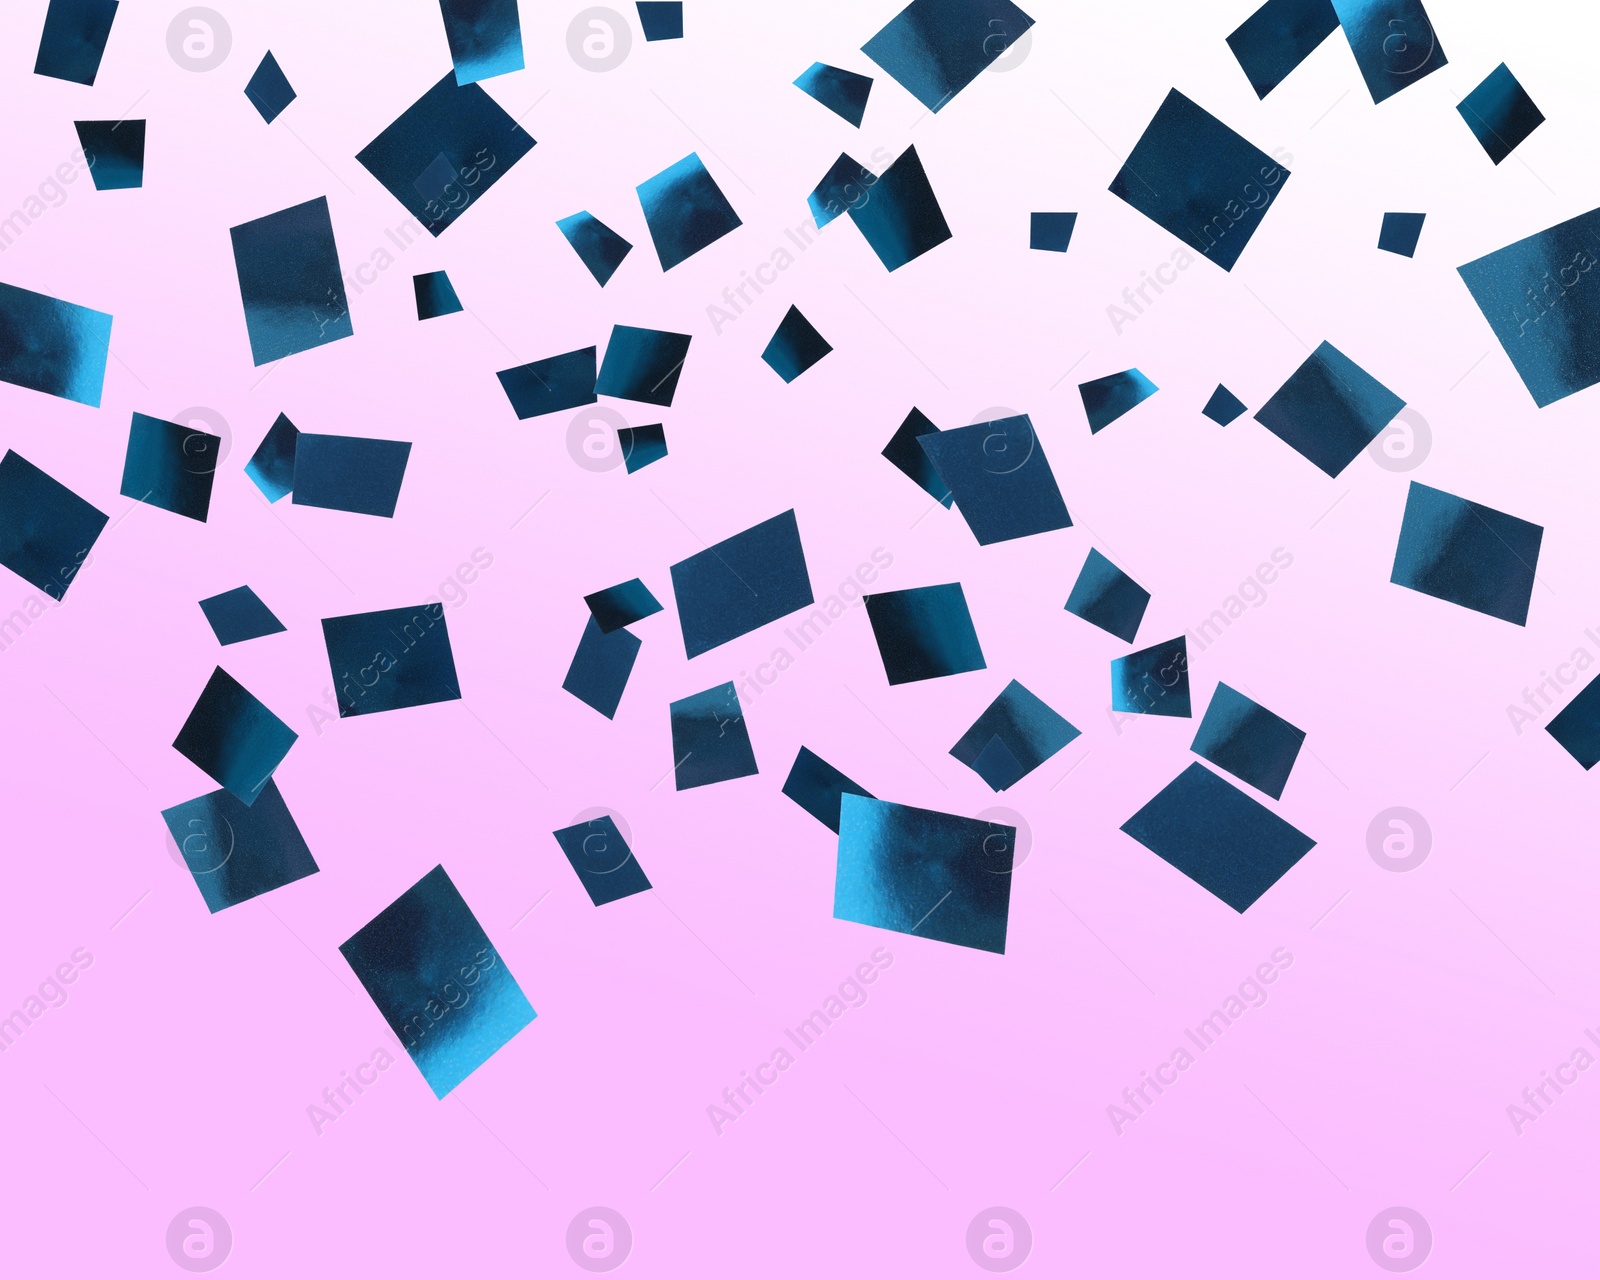 Image of Shiny blue confetti falling on gradient violet background